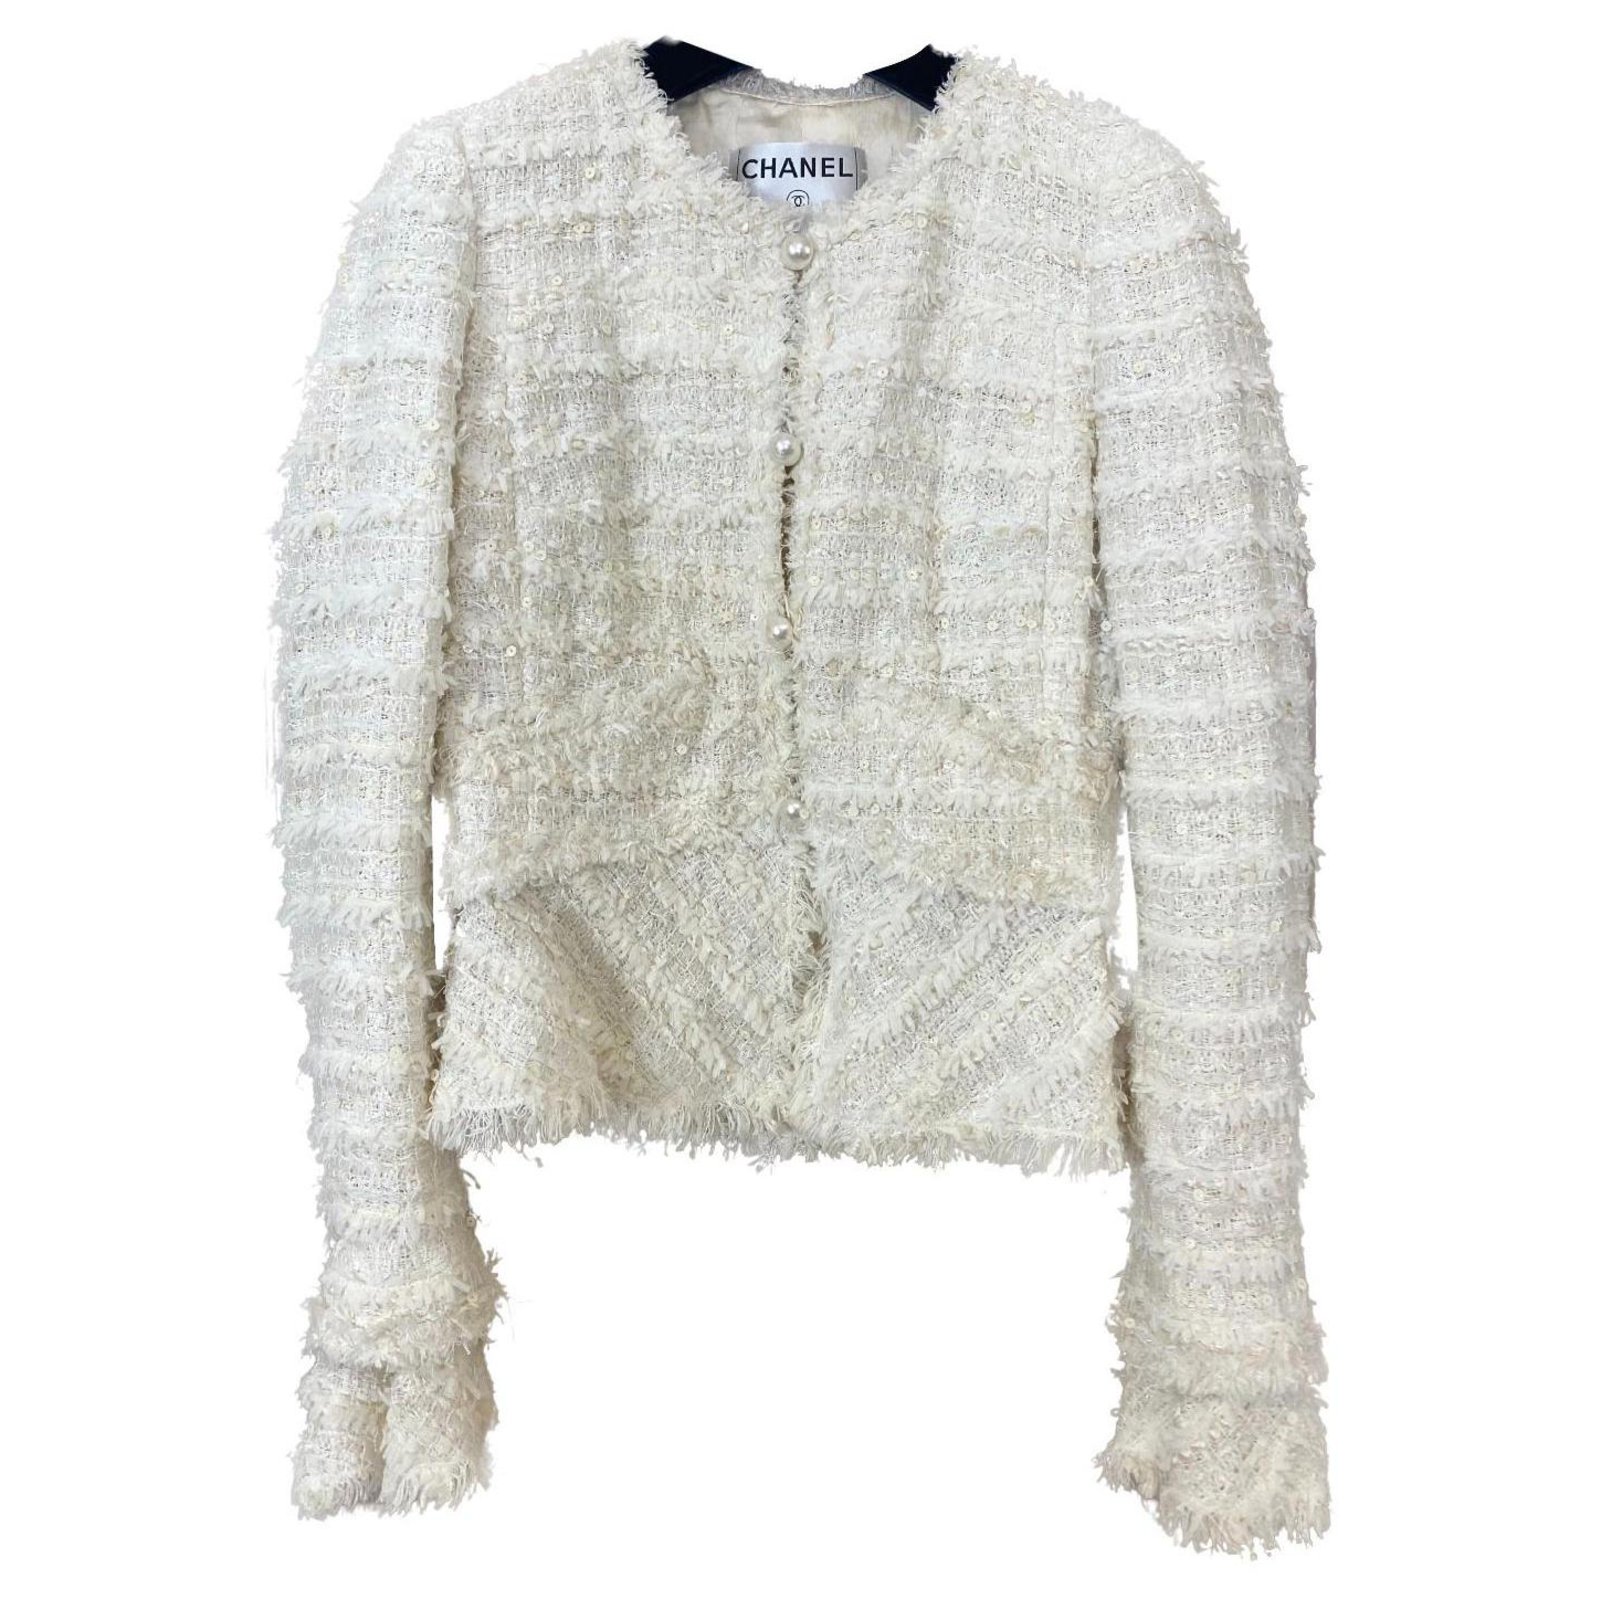 Superb Chanel jacket in white tweed and pearls